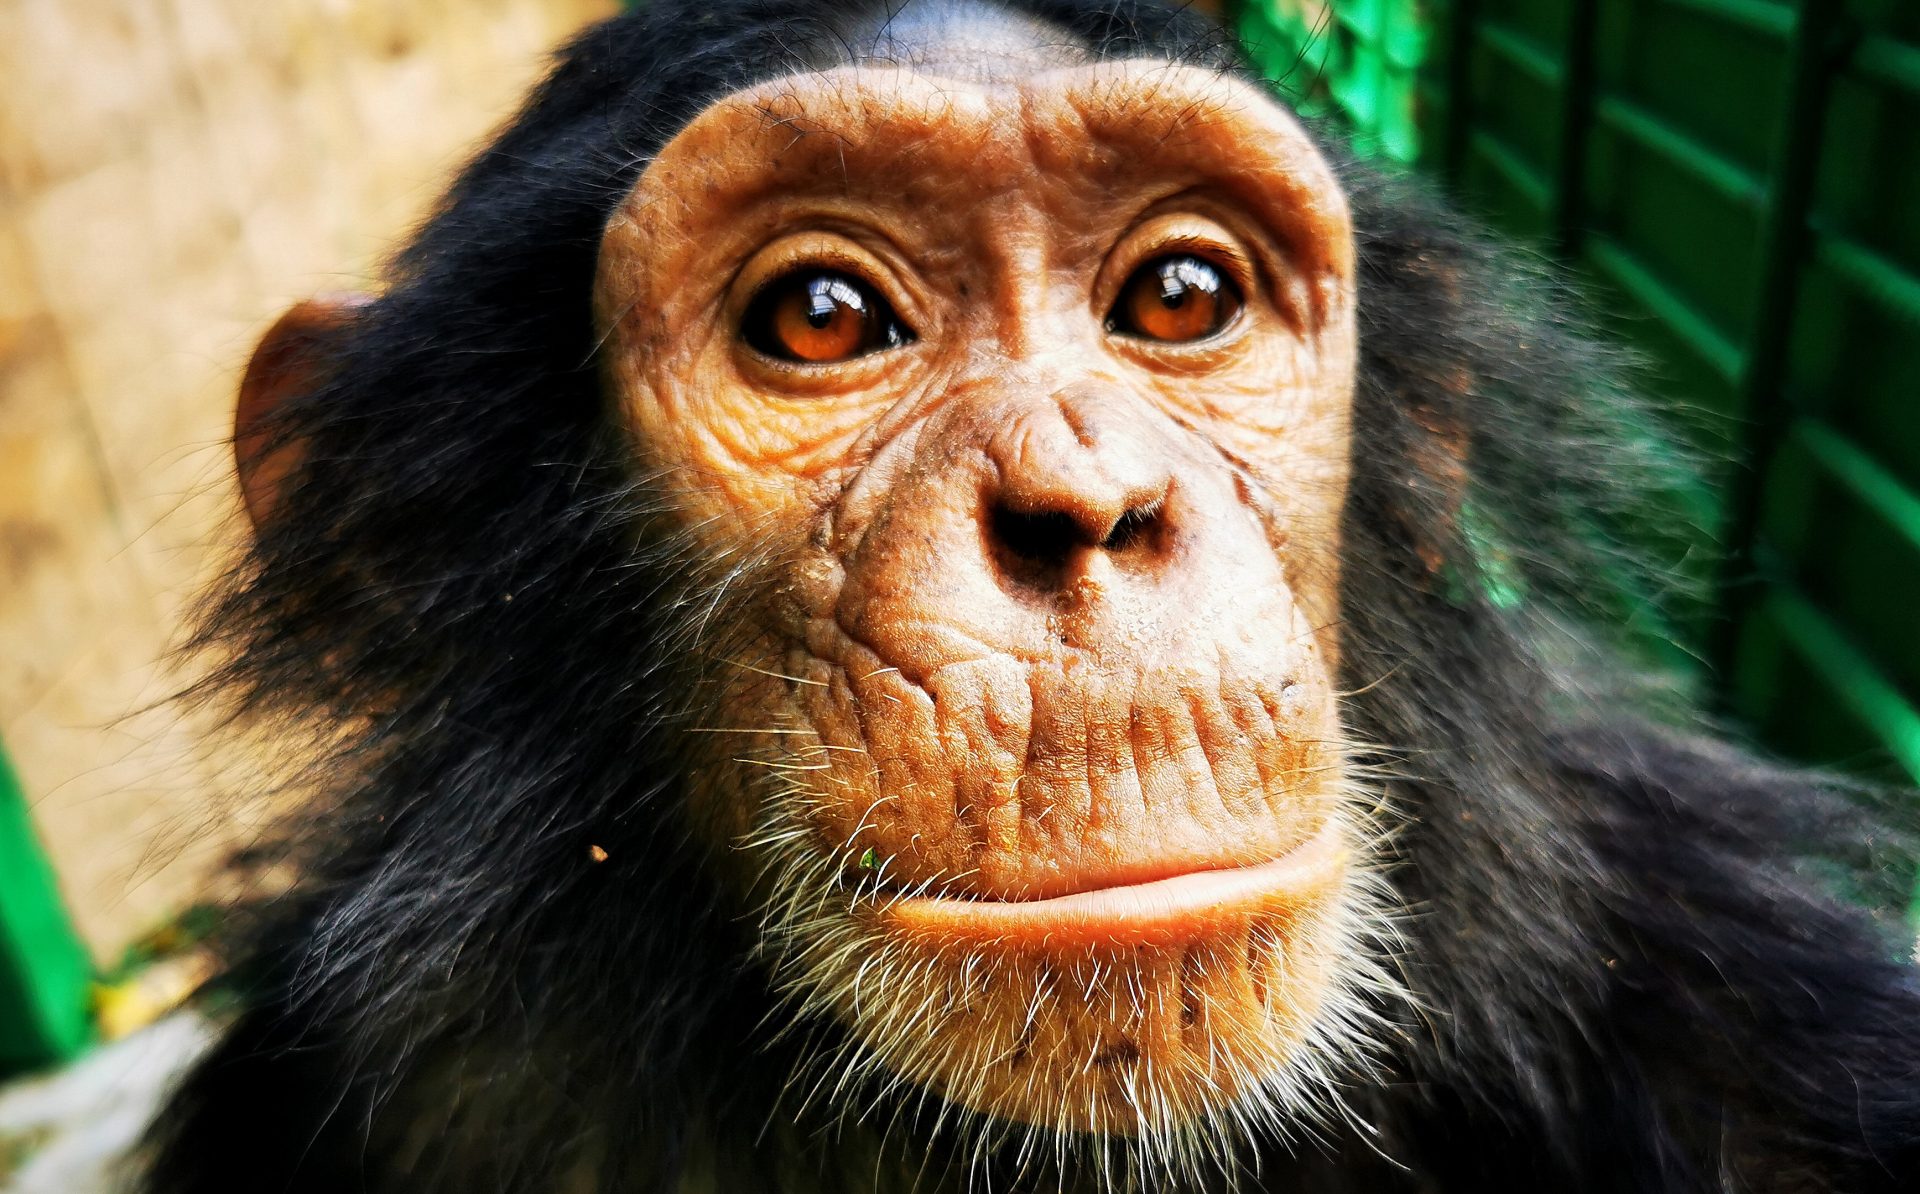 DRC wildlife authorities and 6 NGO’s together to rescue 4 chimps